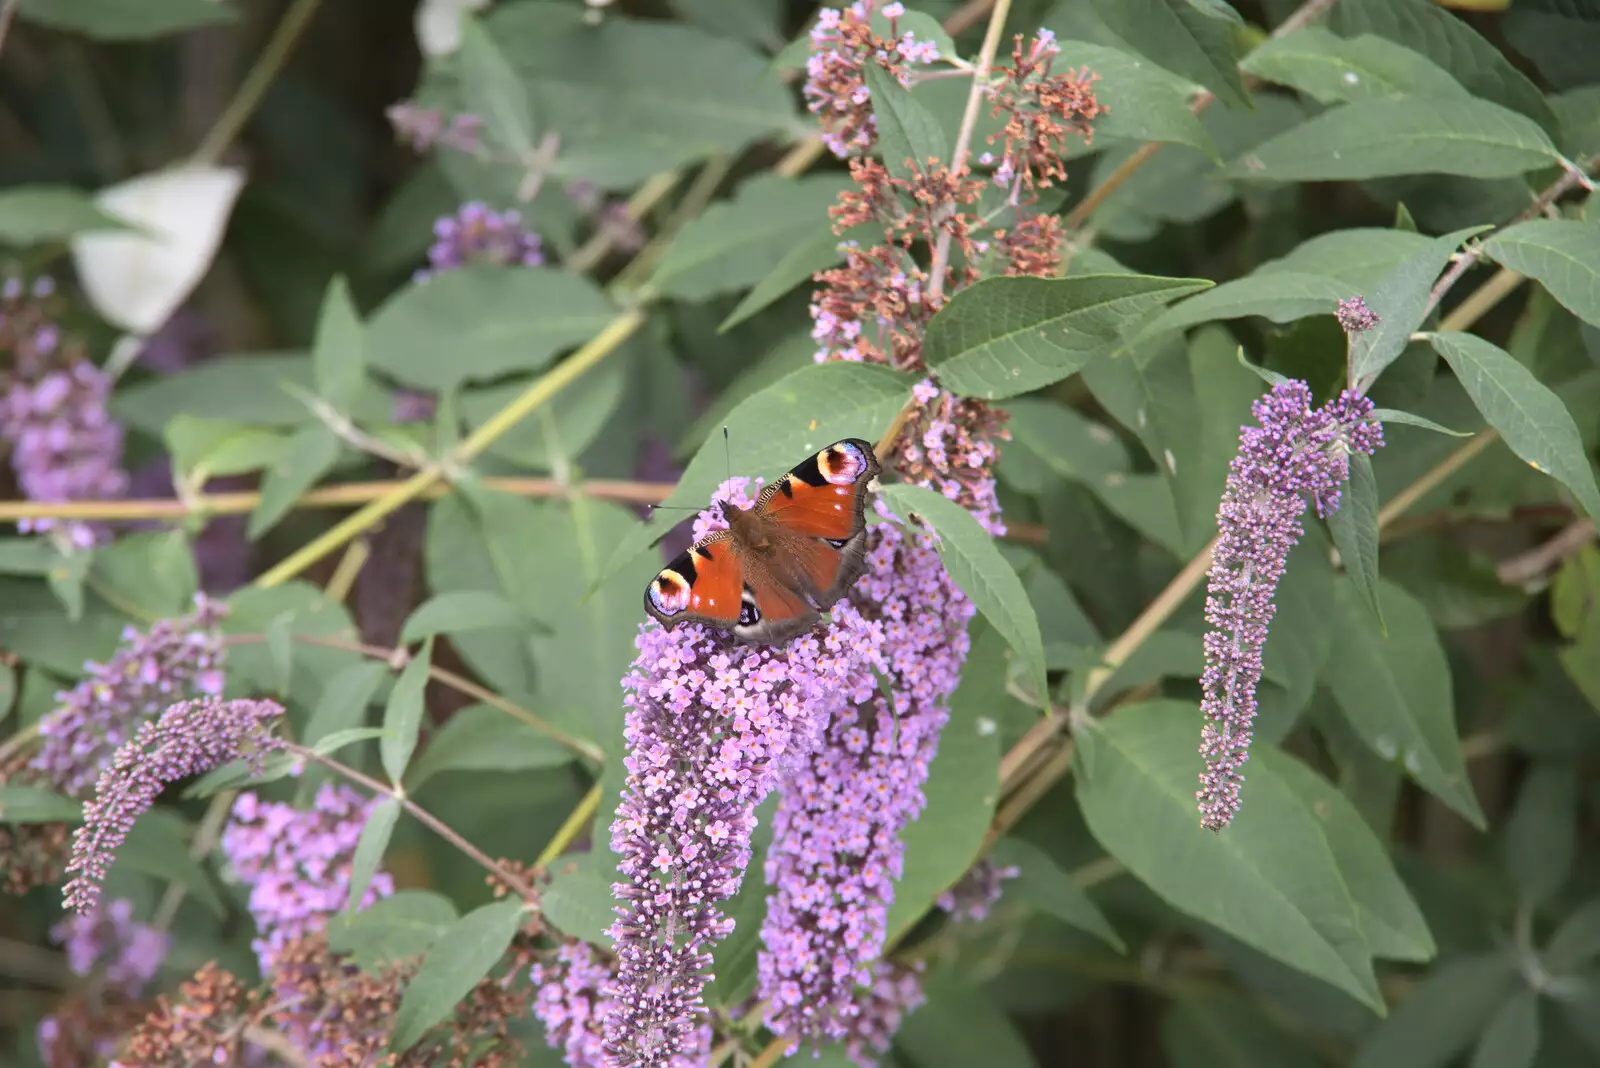 A peacock butterfly on buddleia, from Meg-fest, and Sean Visits, Bressingham and Brome, Suffolk - 1st August 2021